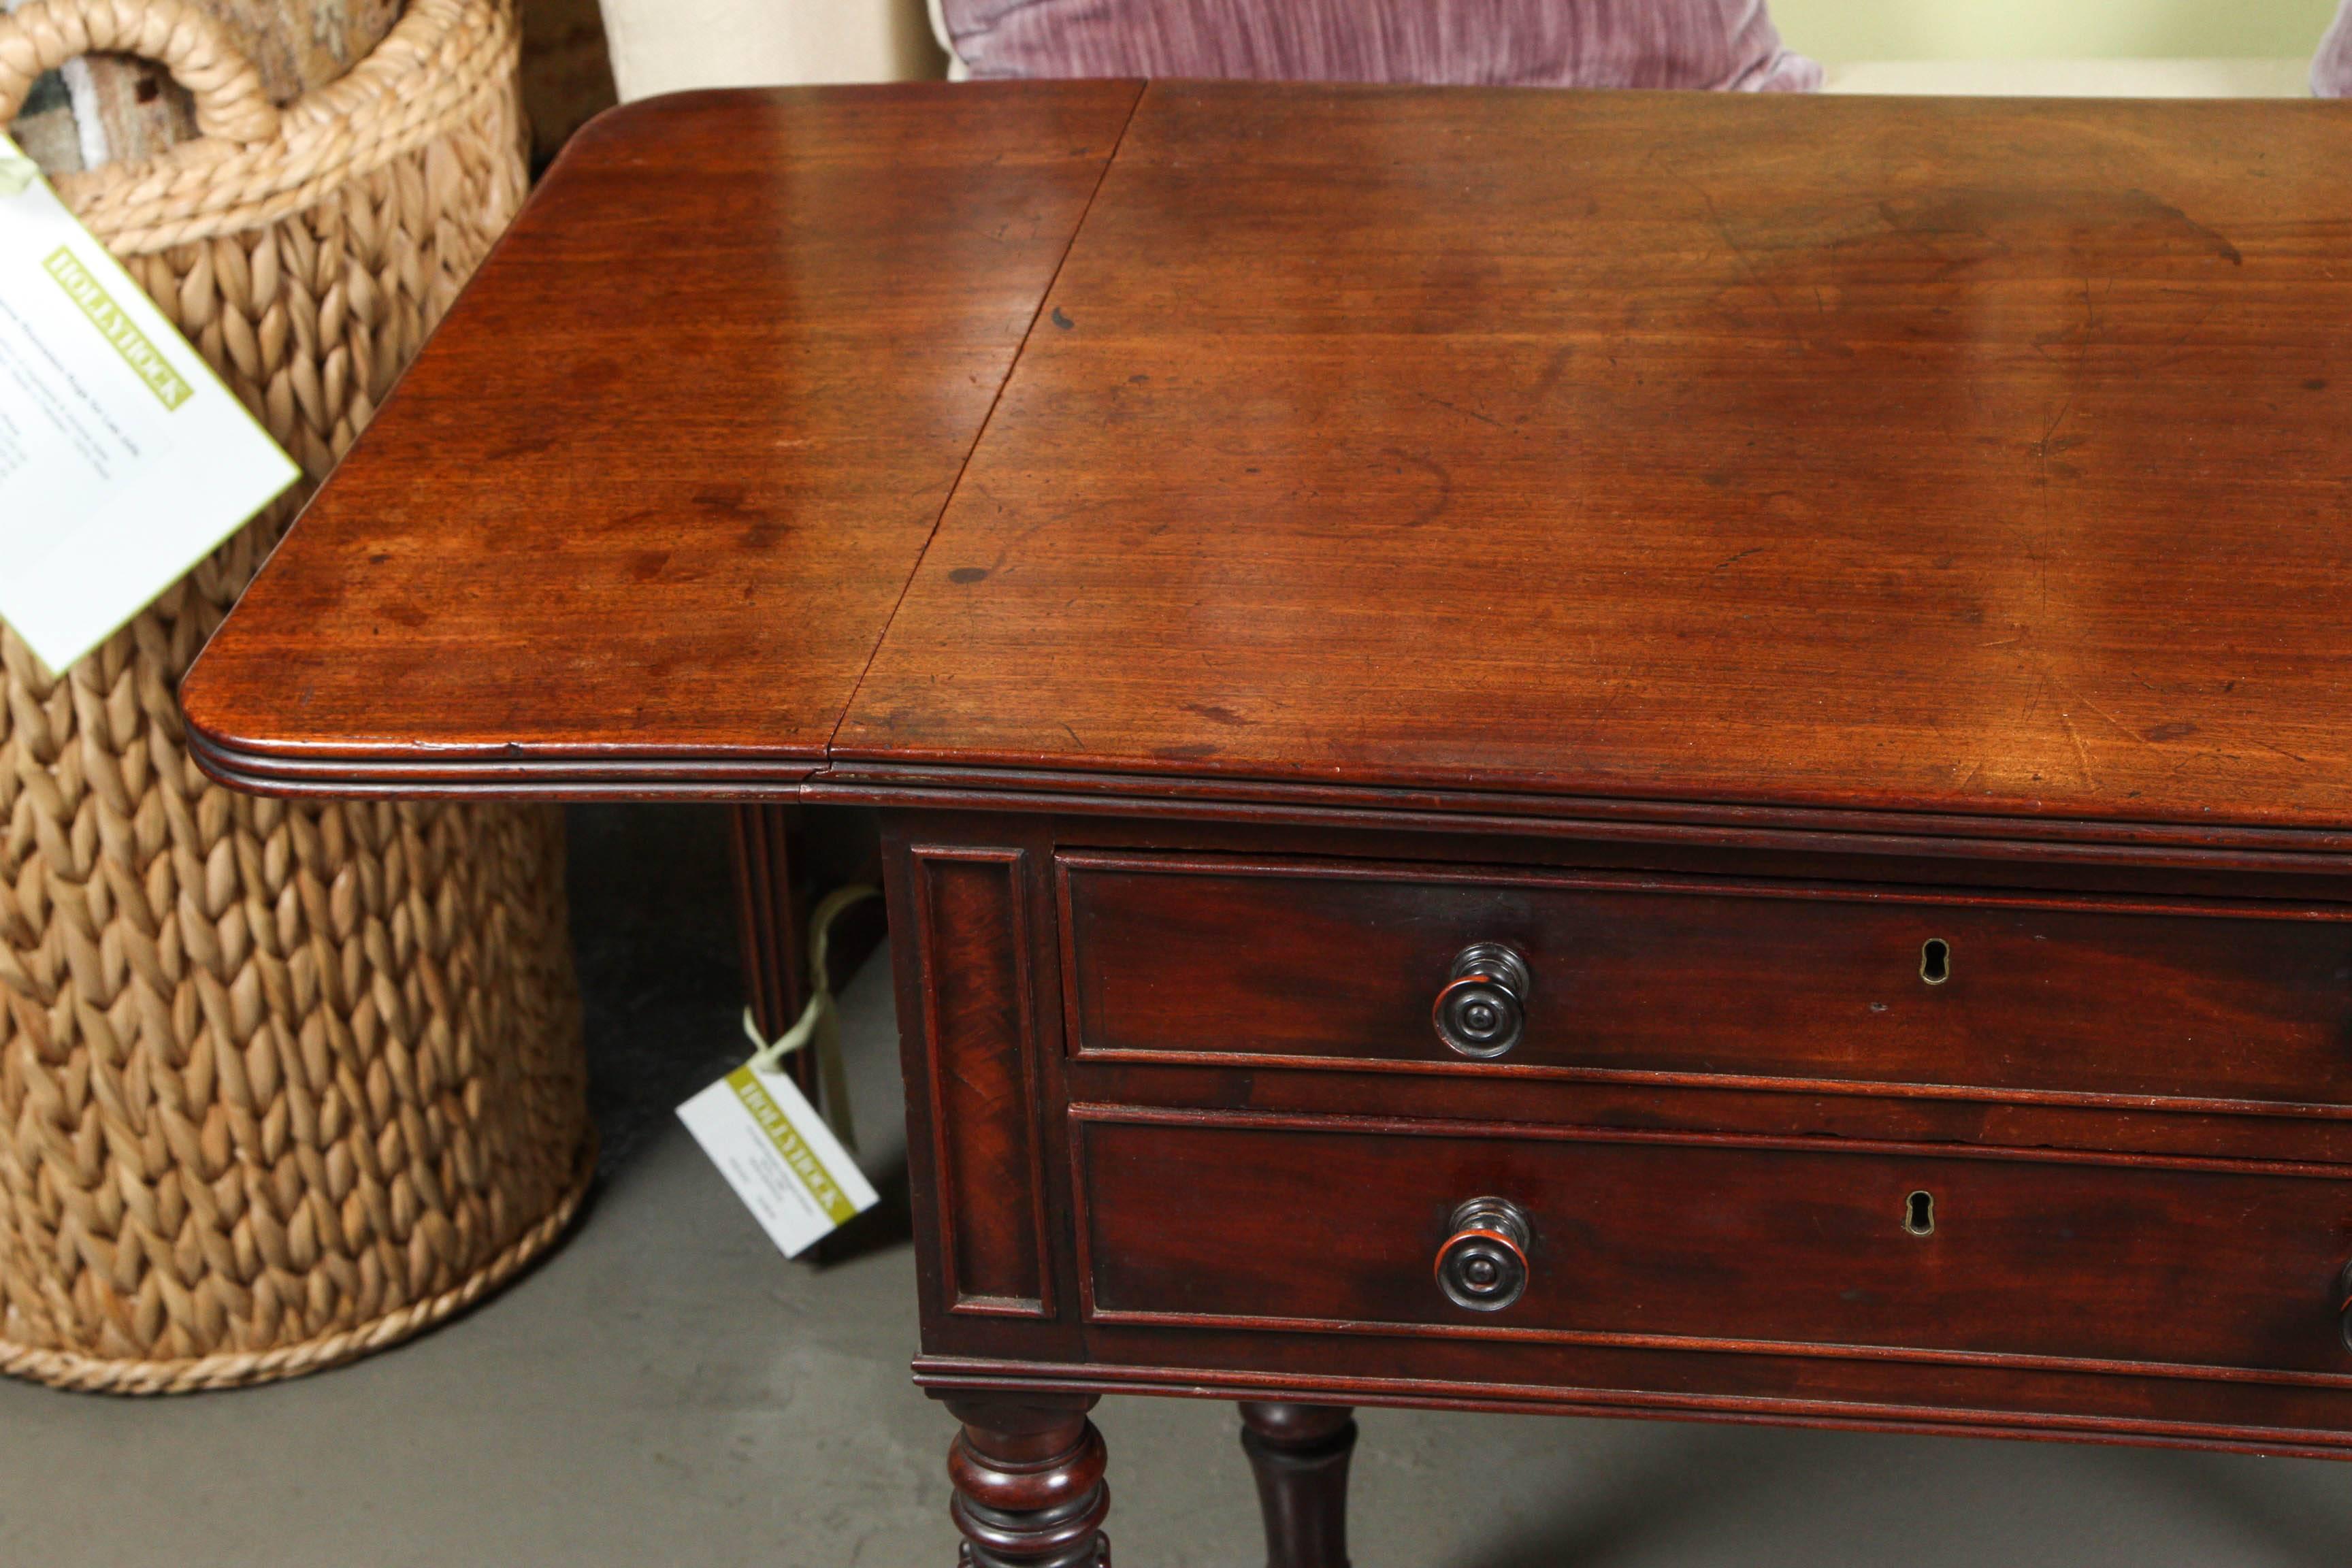 A fine English mahogany drop-leaf pembroke work table in the manner of Sheraton, featuring a rectangular top with fold-down sides. Two drawers with brass casters.